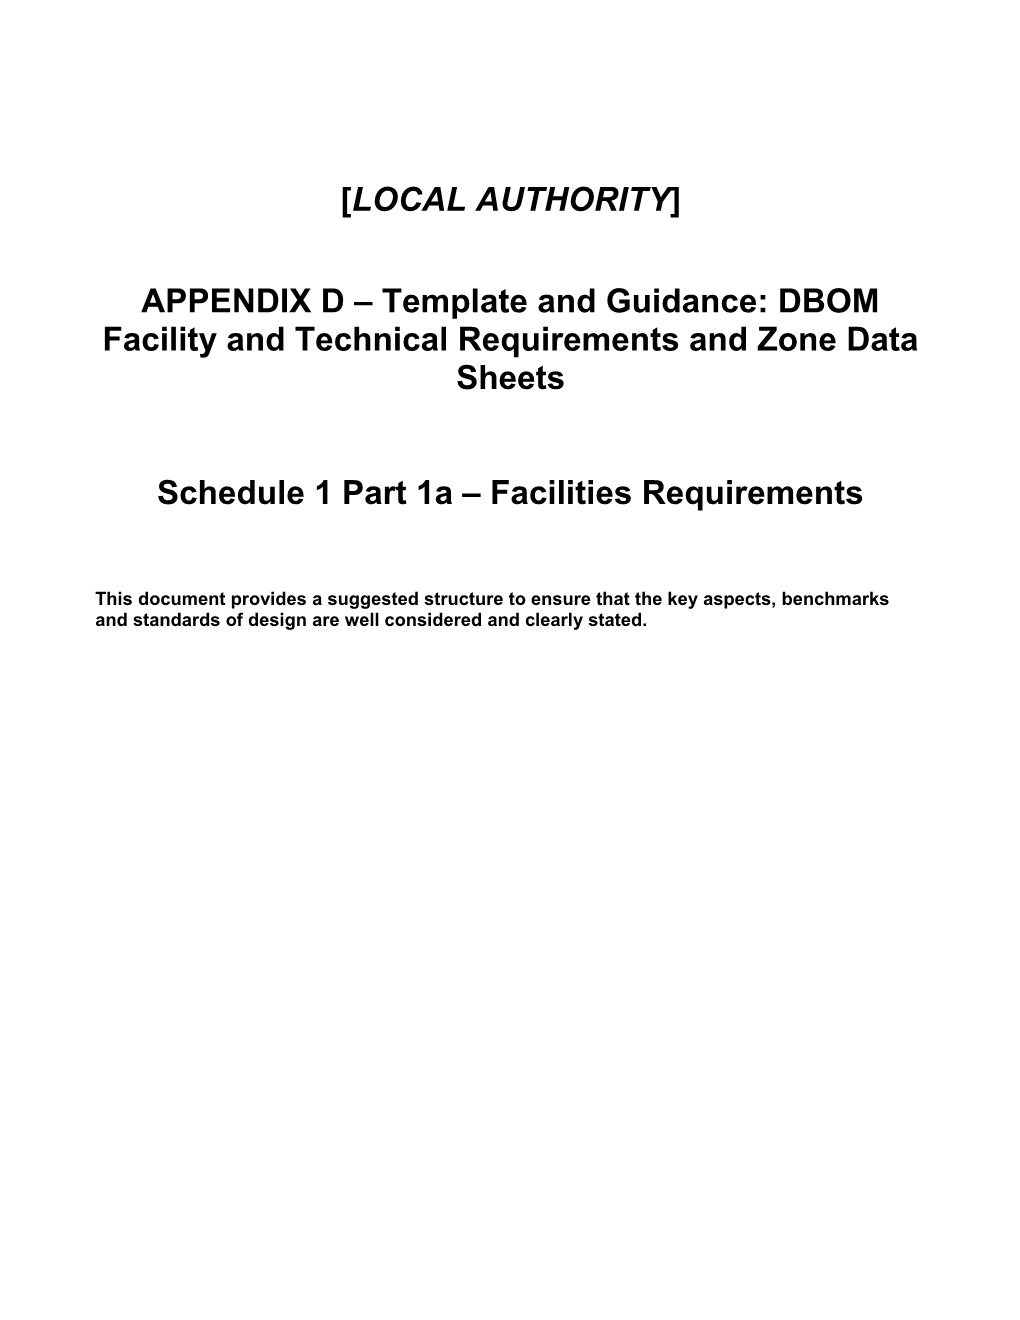 Schedule 1 Part 1A Facilities Requirements